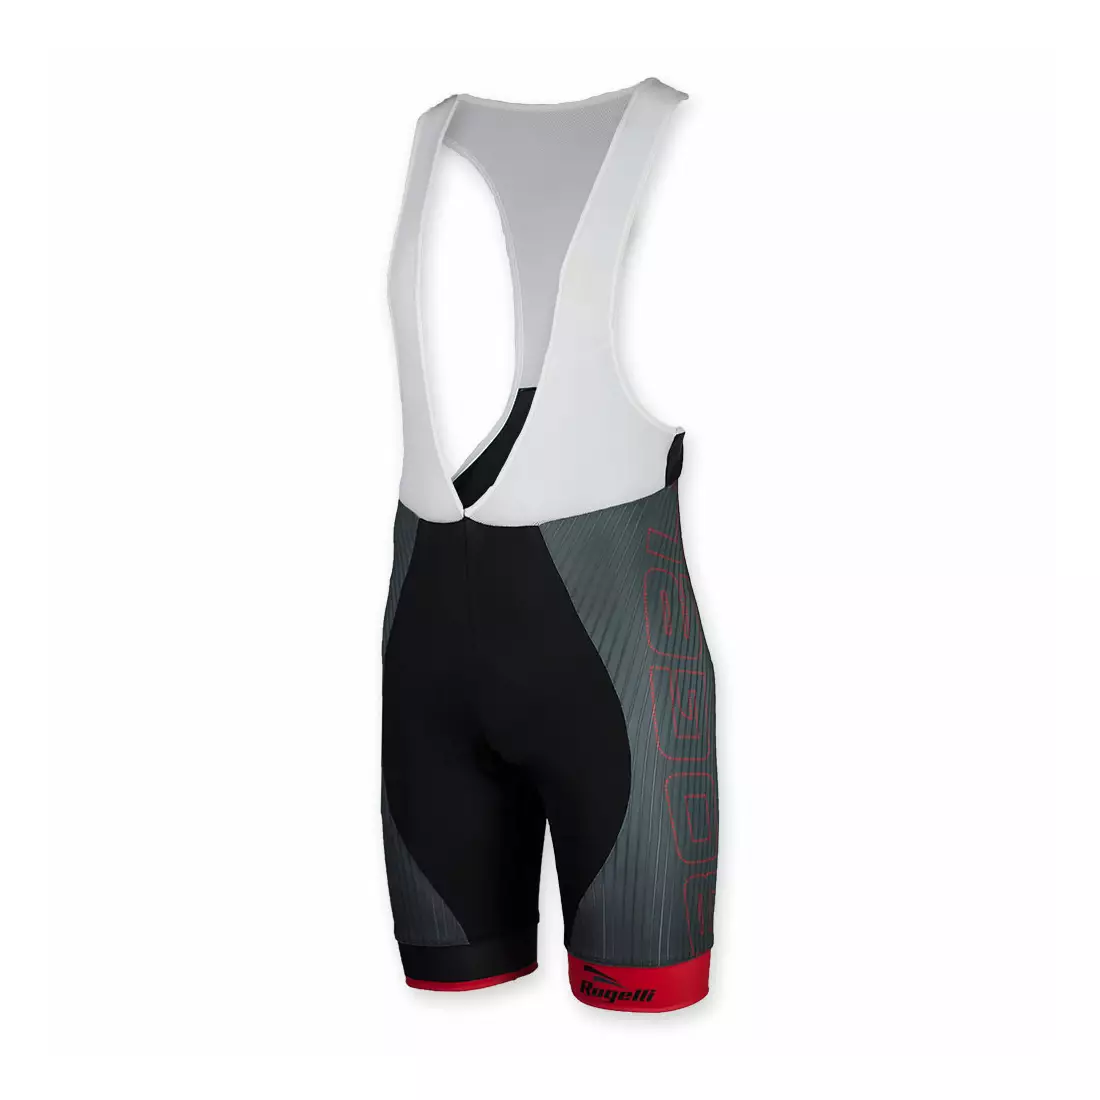 ROGELLI BIKE 002.438 ANDRANO men's cycling shorts, color: black and red